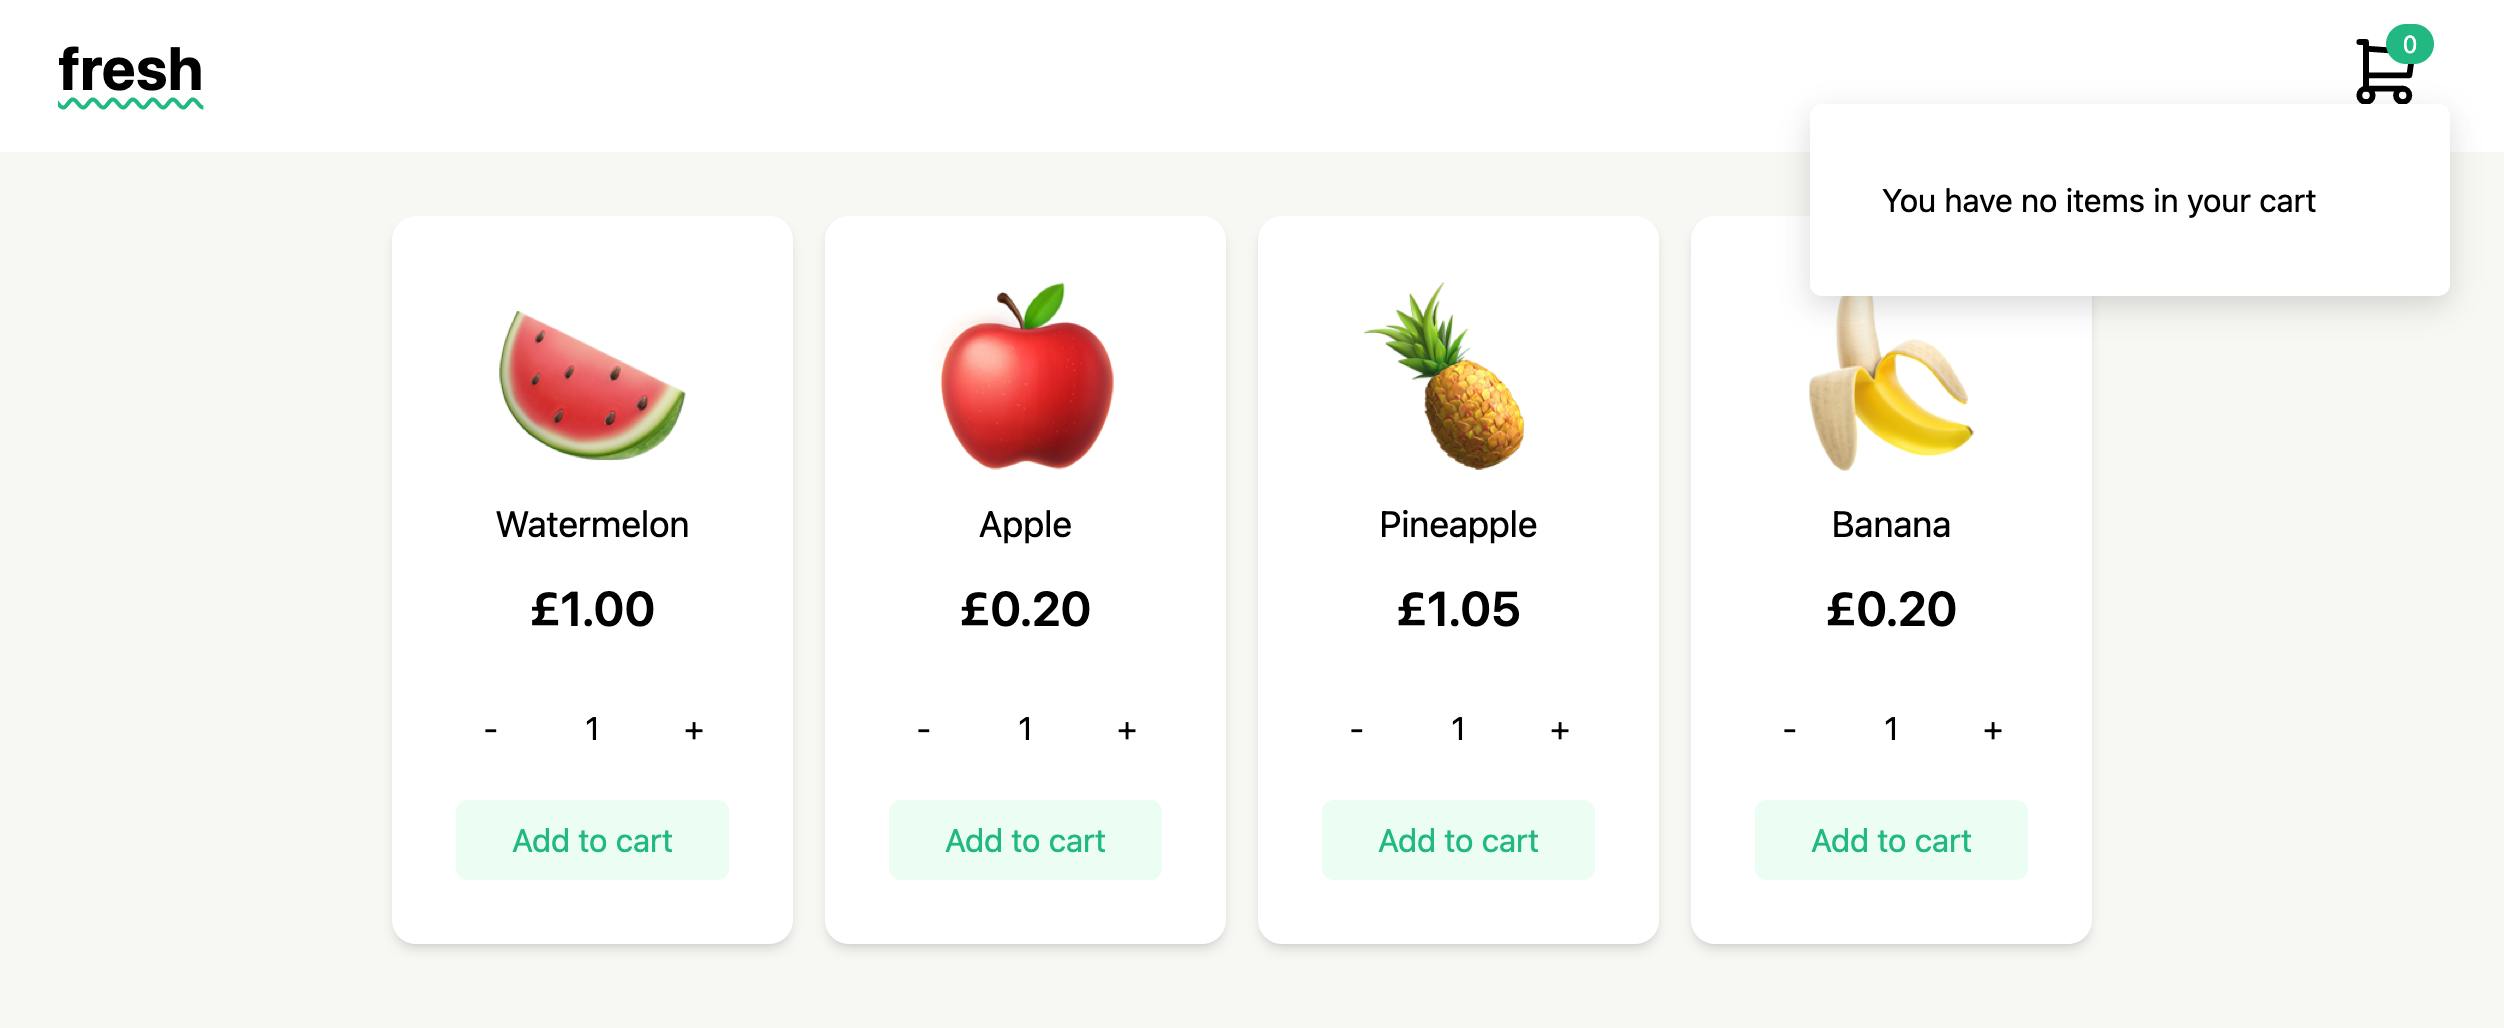 Screenshot of the starter project. It's a simple fruit shop called "fresh". There are four products on screen: Watermelon (£1), Apple (£0.20), Pineapple (£1.05) and Banana (£0.20). Each product has a number representing the quantity and plus and minus buttons to change it. There's also an Add to cart button. The navigation bar has the shop's name "fresh" with a green squiggly underline effect. There is also a shopping cart icon which shows that there are 0 items in the cart. The shopping cart is open and it says "You have no items in your cart".